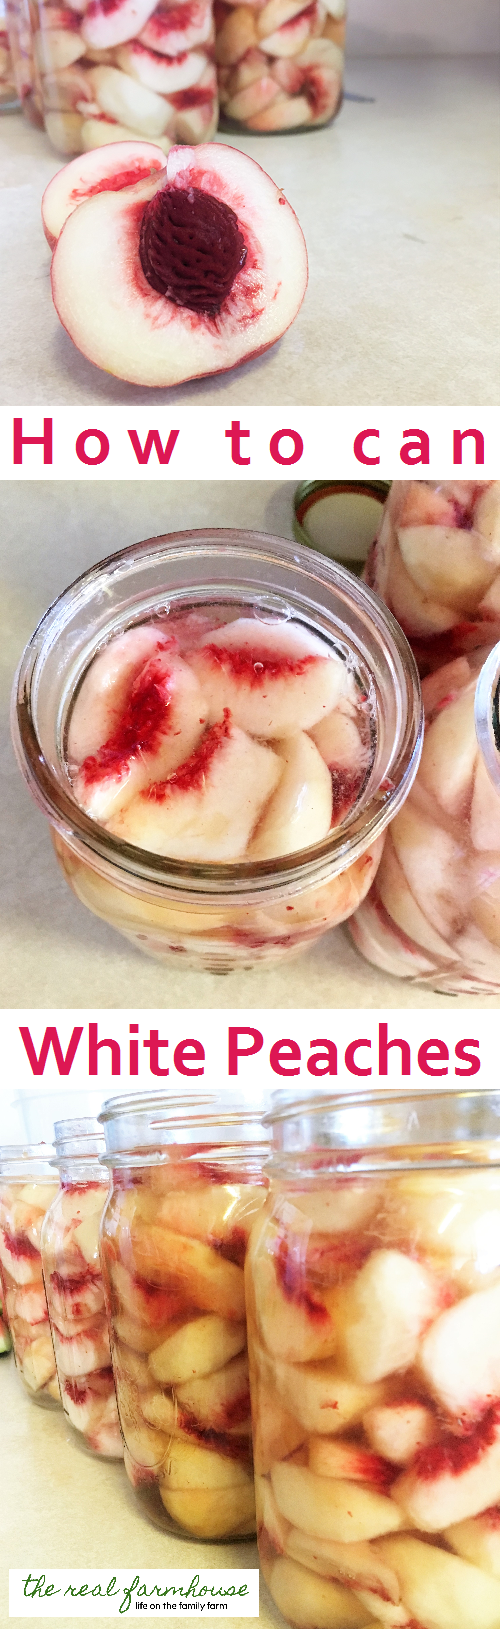 So beautiful and so delicious! How to can white peaches